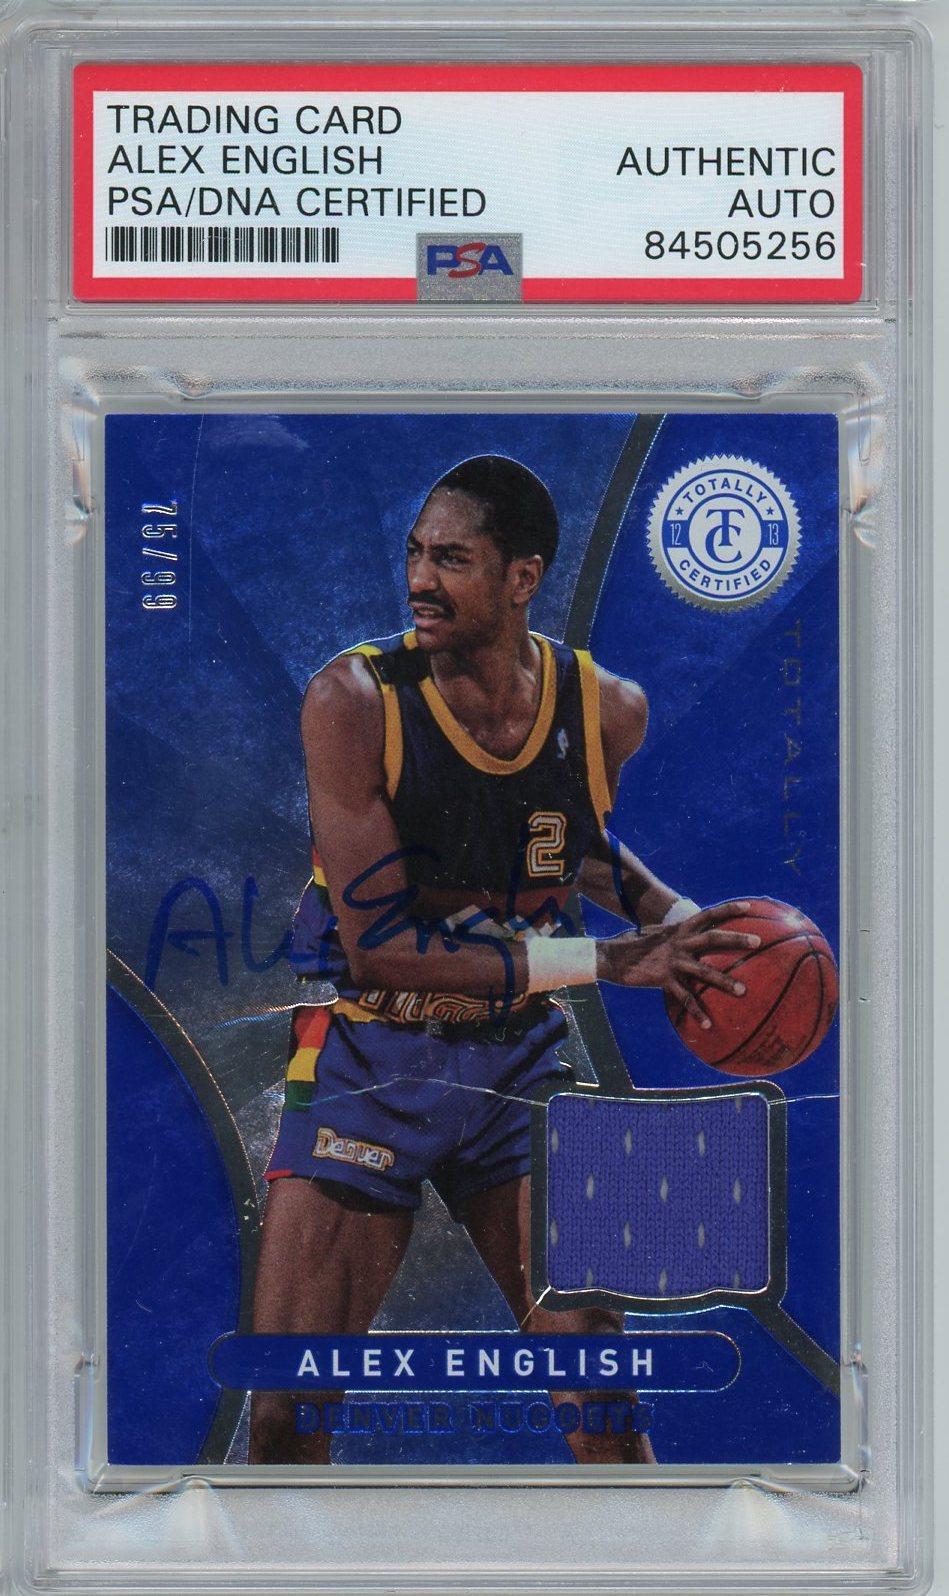 2013 PANINI TOTALLY CERTIFIED ALEX ENGLISH BLUE JERSEY #75/99 #85 PSA/DNA AUTO